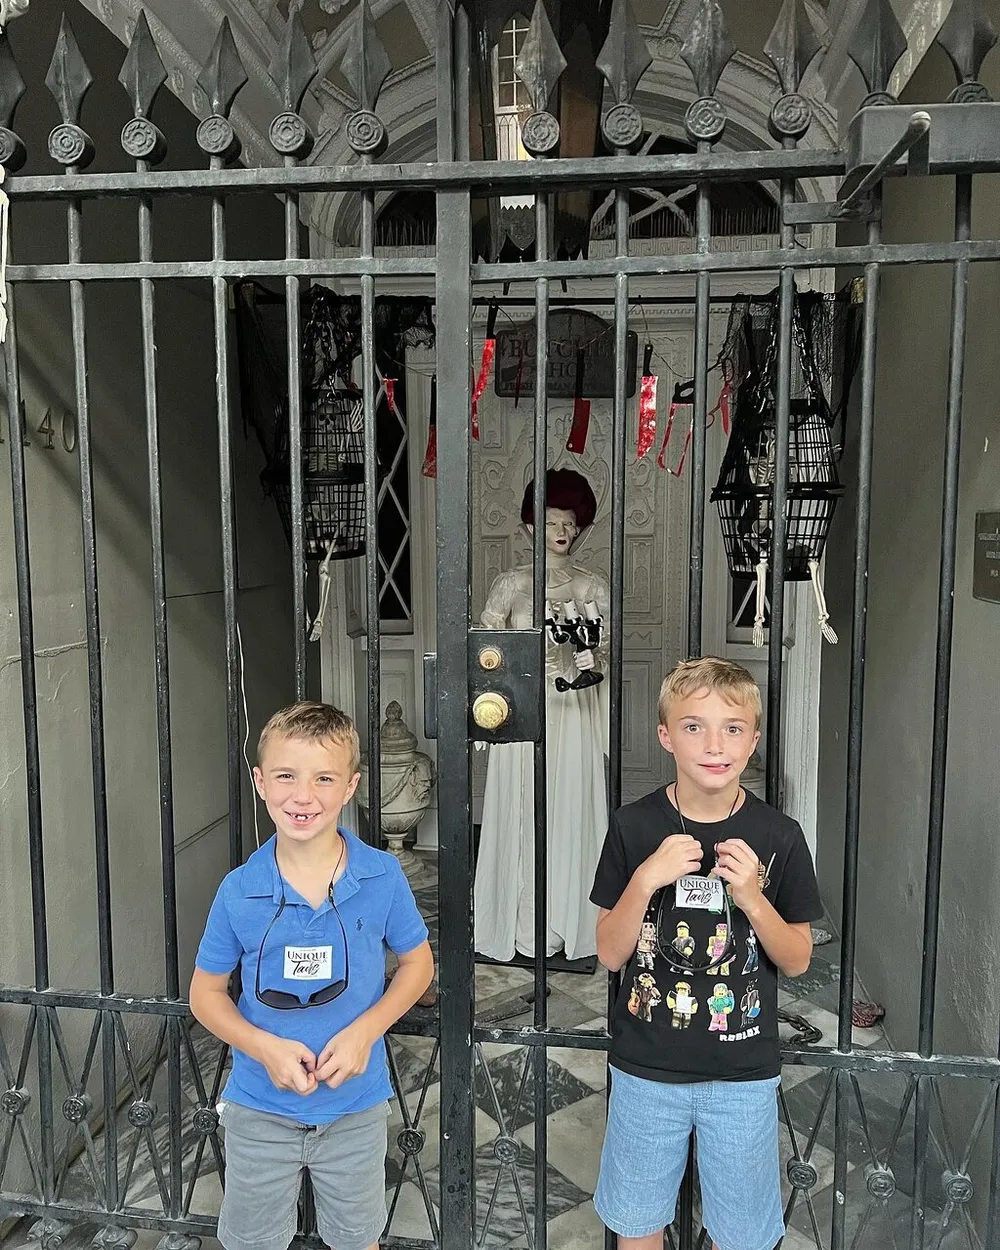 Two boys are smiling in front of a gate with an eccentrically dressed figure behind them creating a whimsical and curious scene